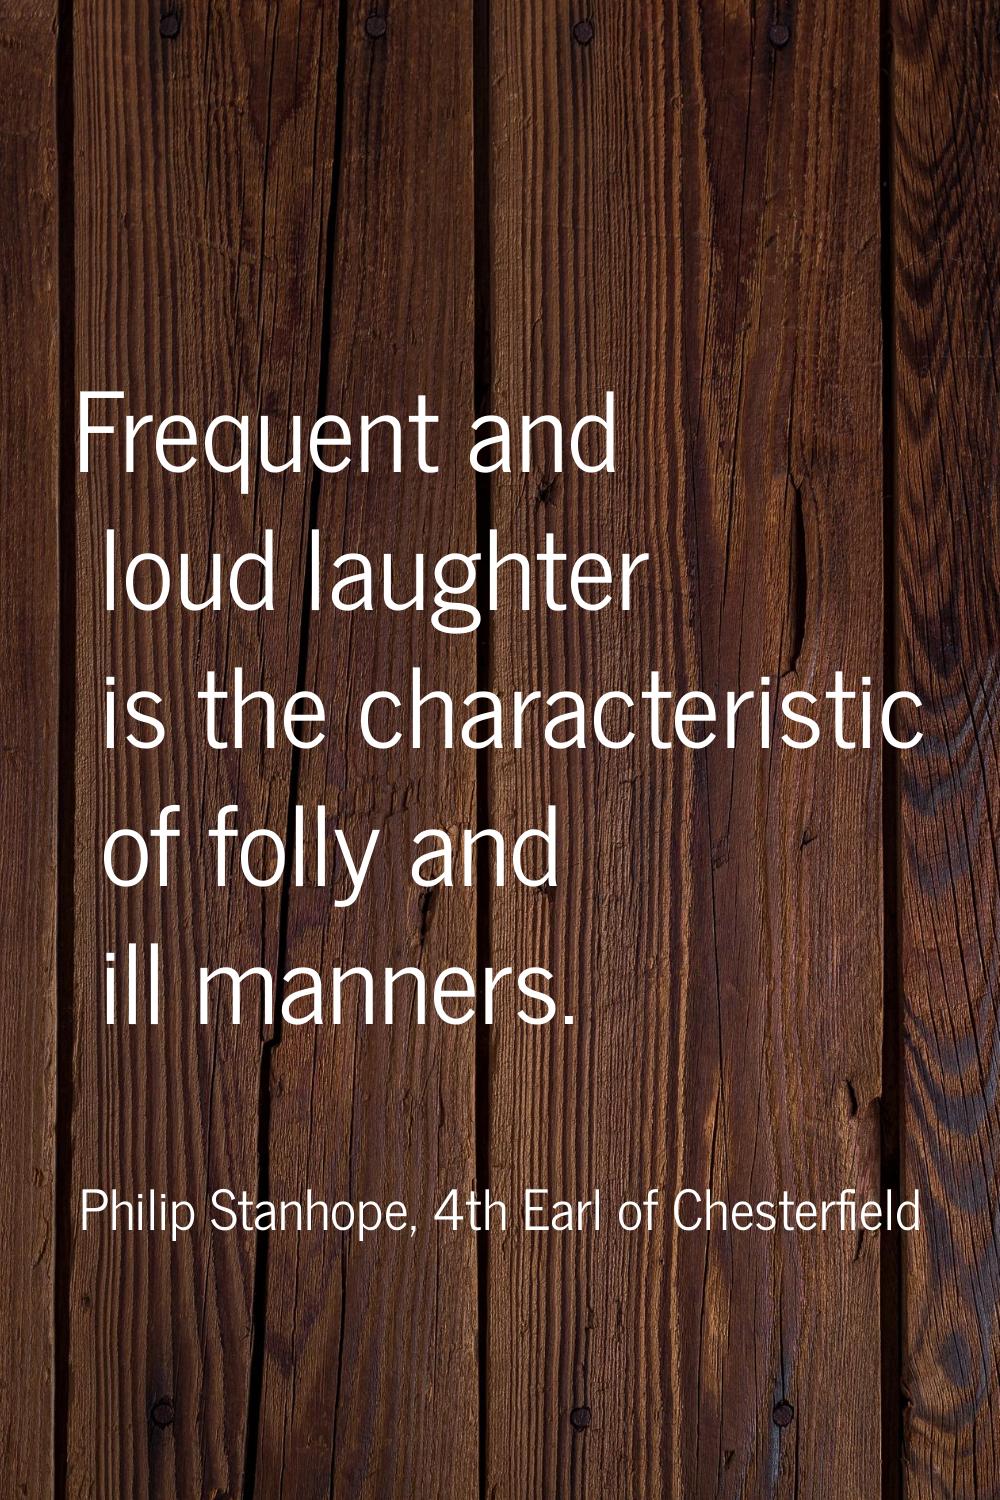 Frequent and loud laughter is the characteristic of folly and ill manners.